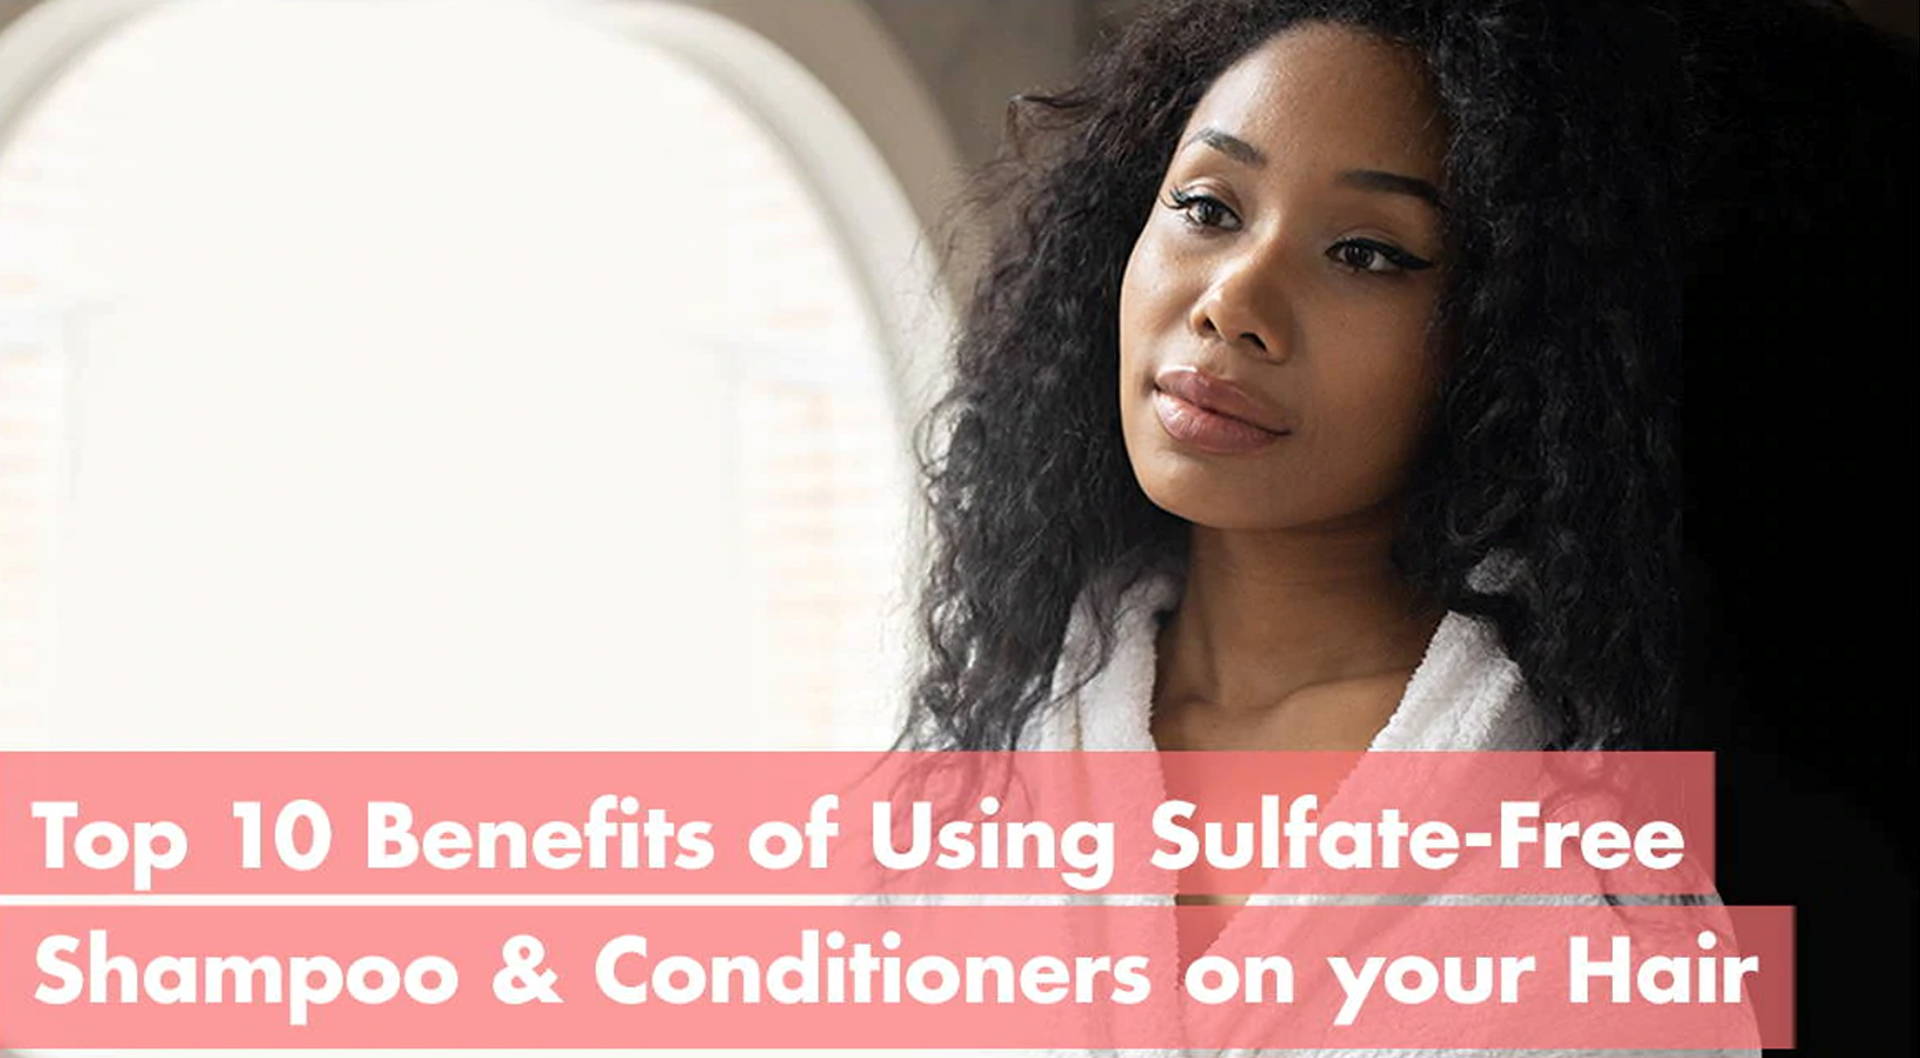 Top 10 Benefits of Using Sulfate-Free Shampoo & Conditioners on your